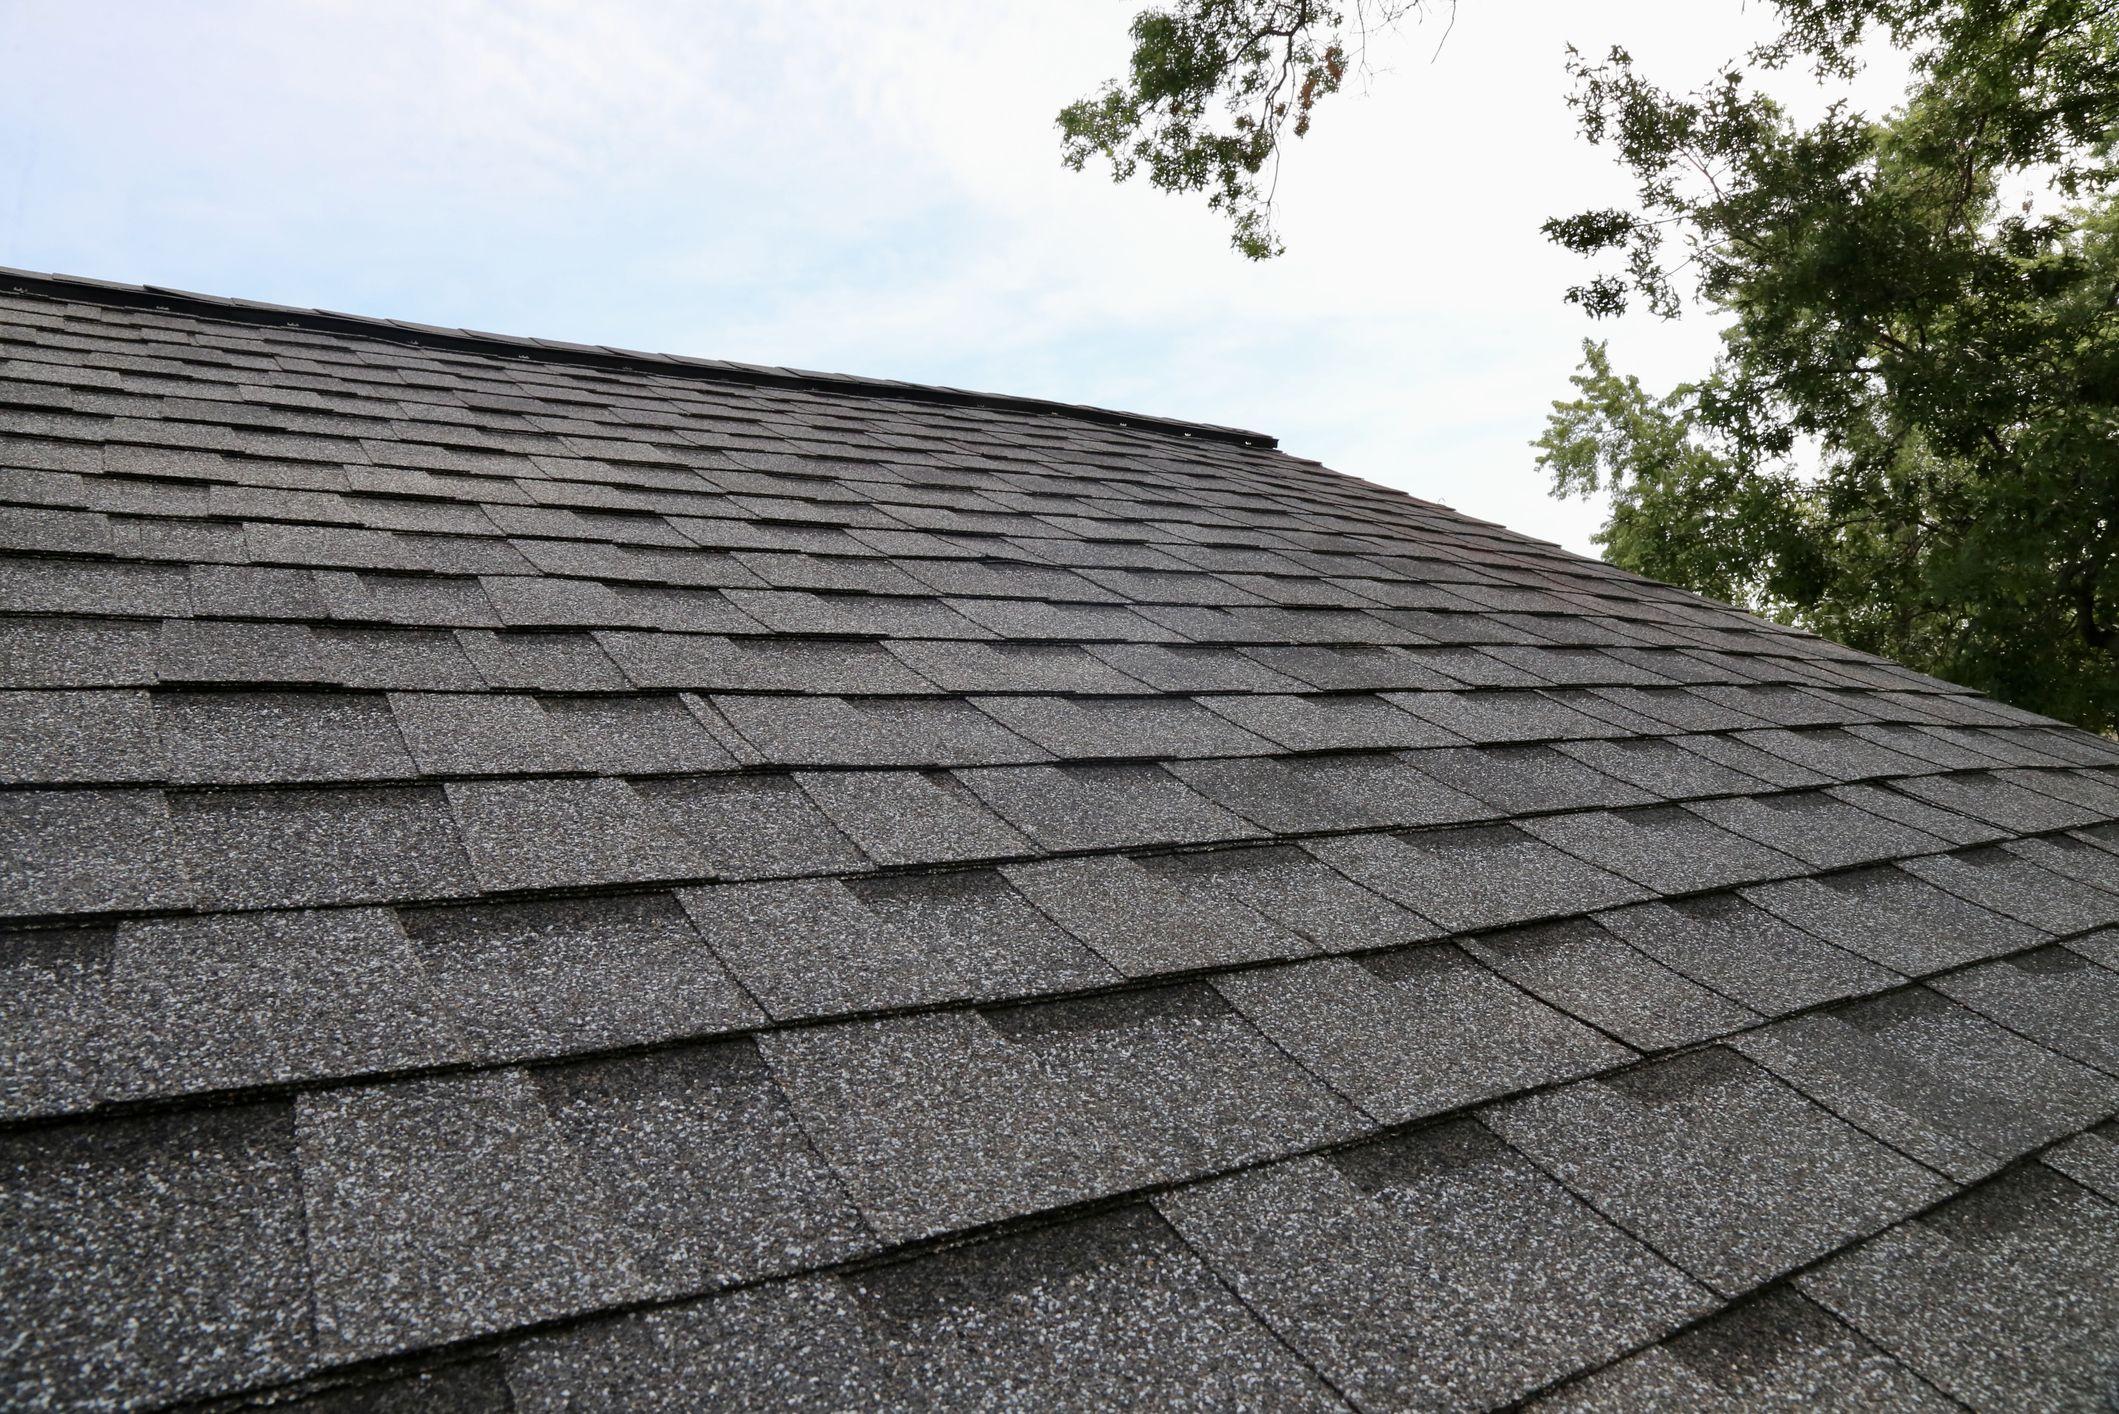 Roofing Material: How Many Square Feet Are in a Square?